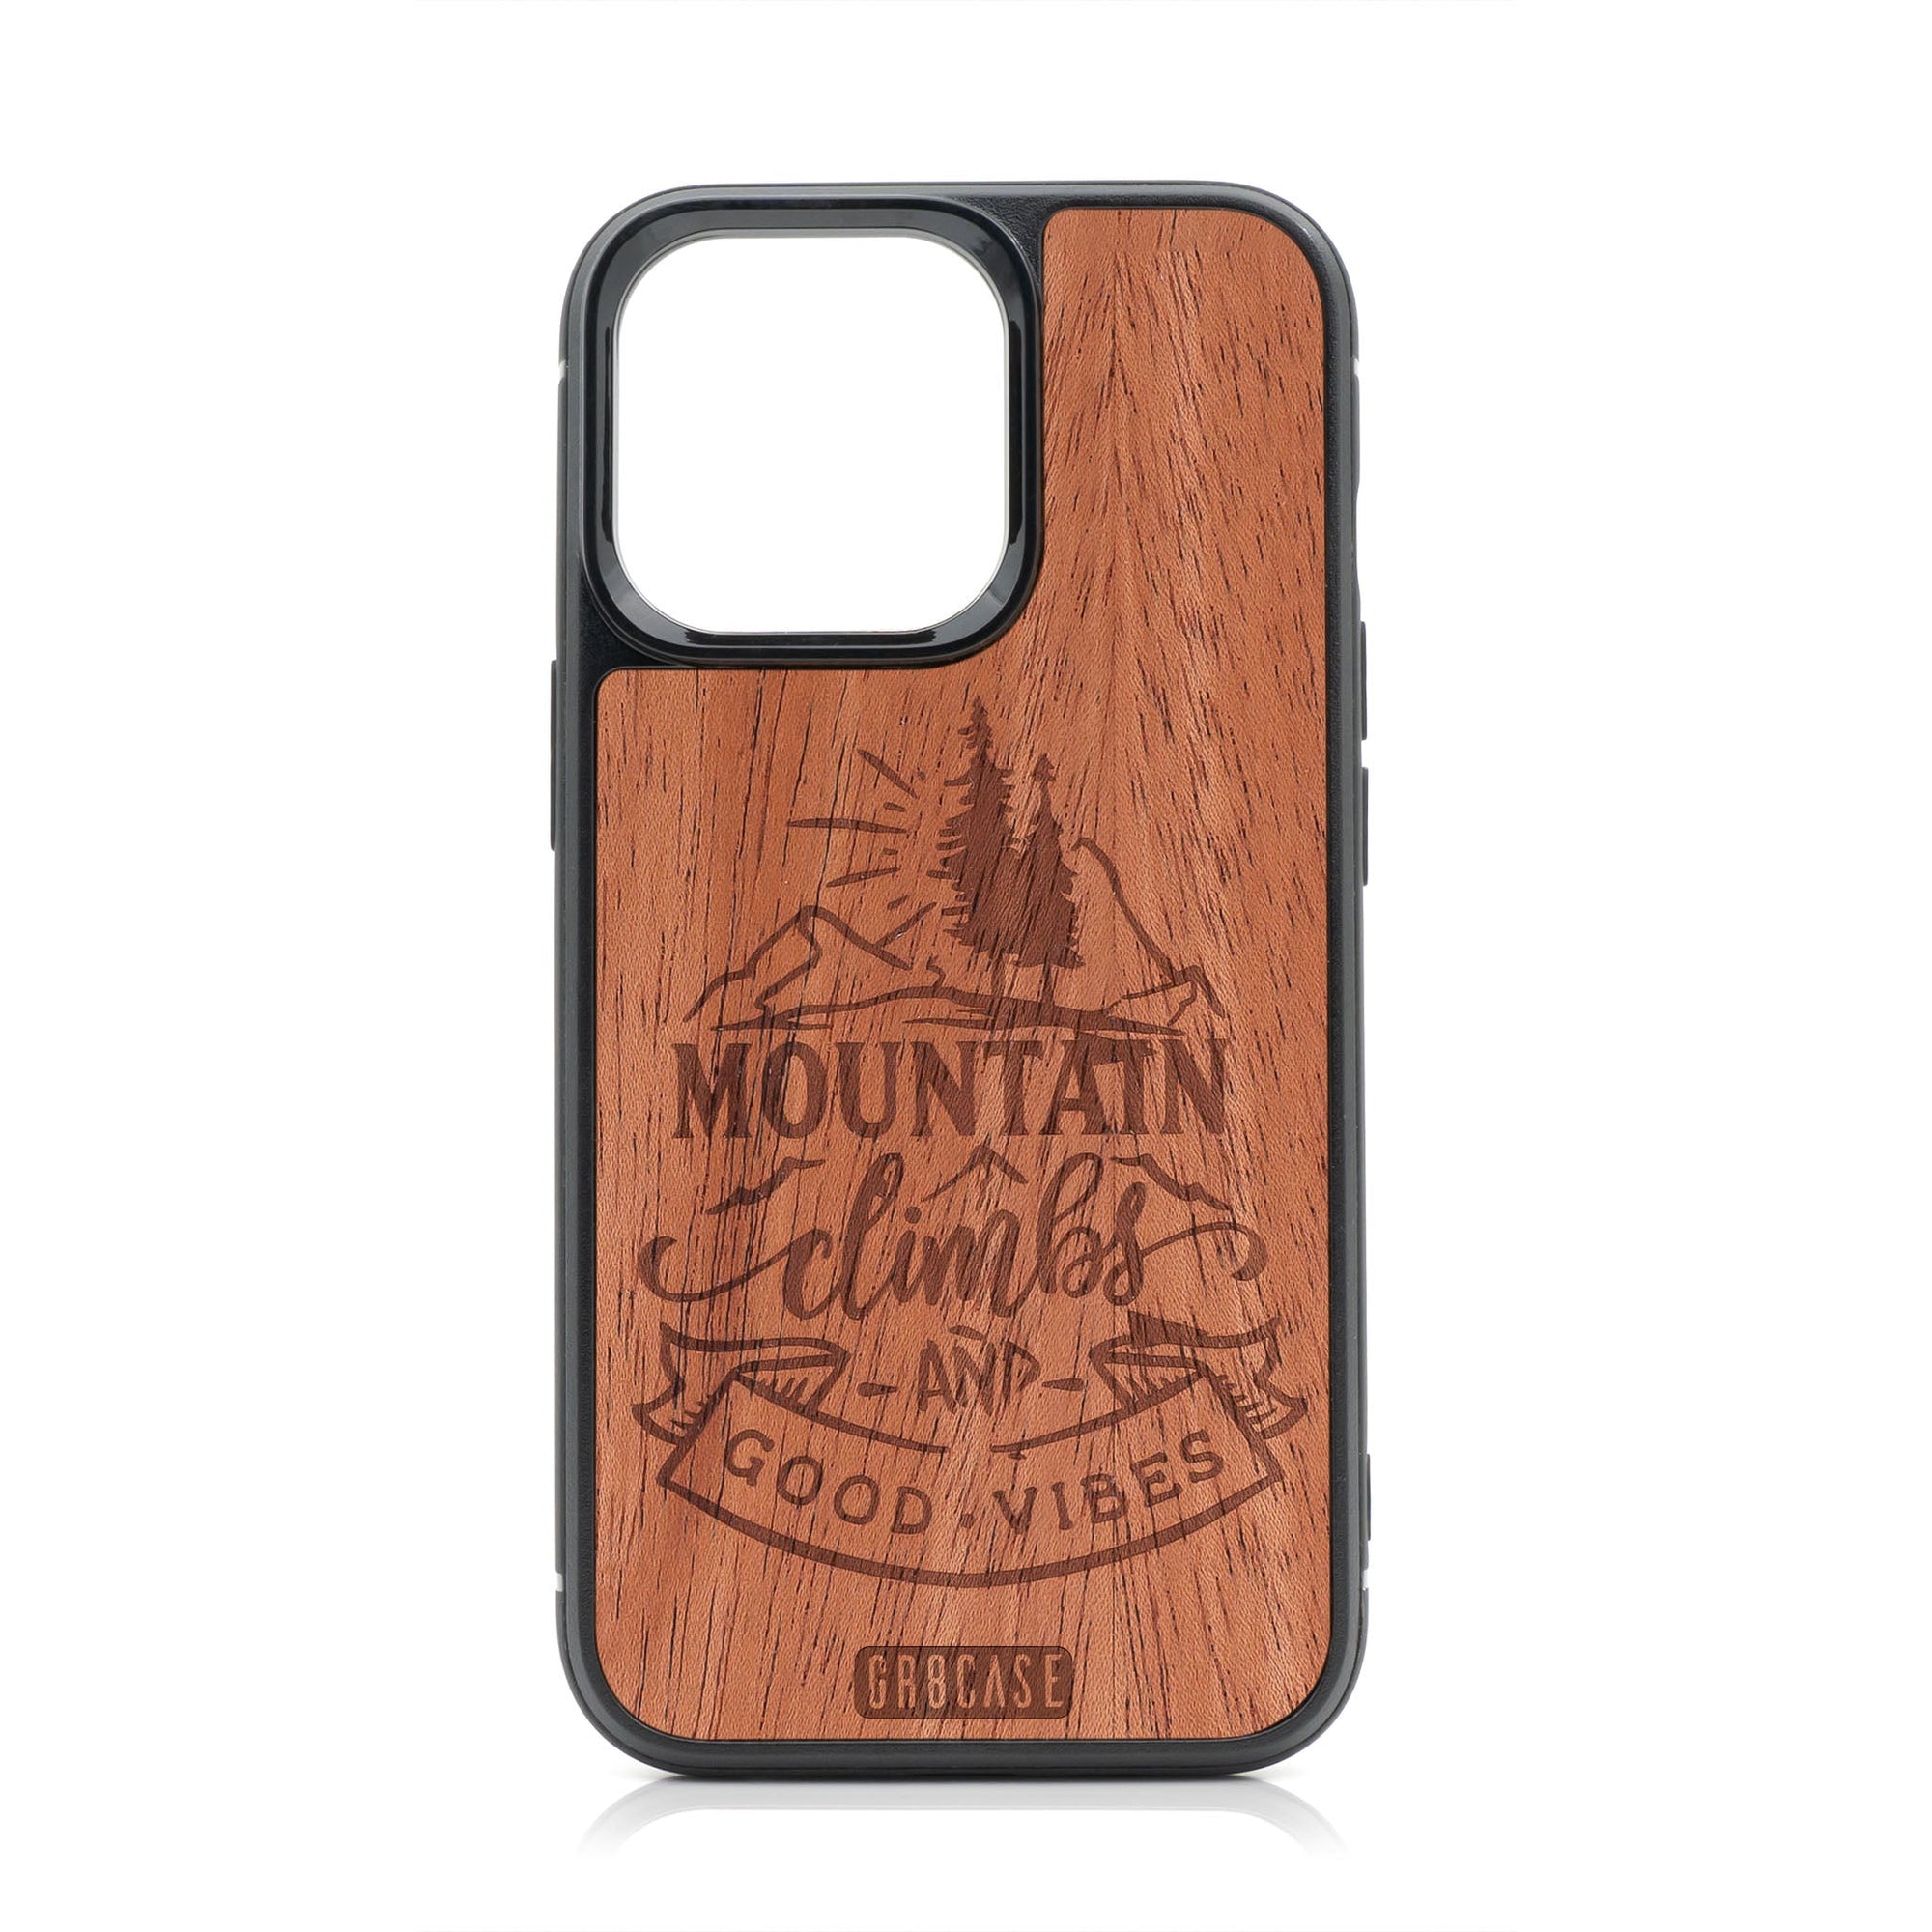 Mountain Climb Good Vibes Design Wood Case For iPhone 14 Pro